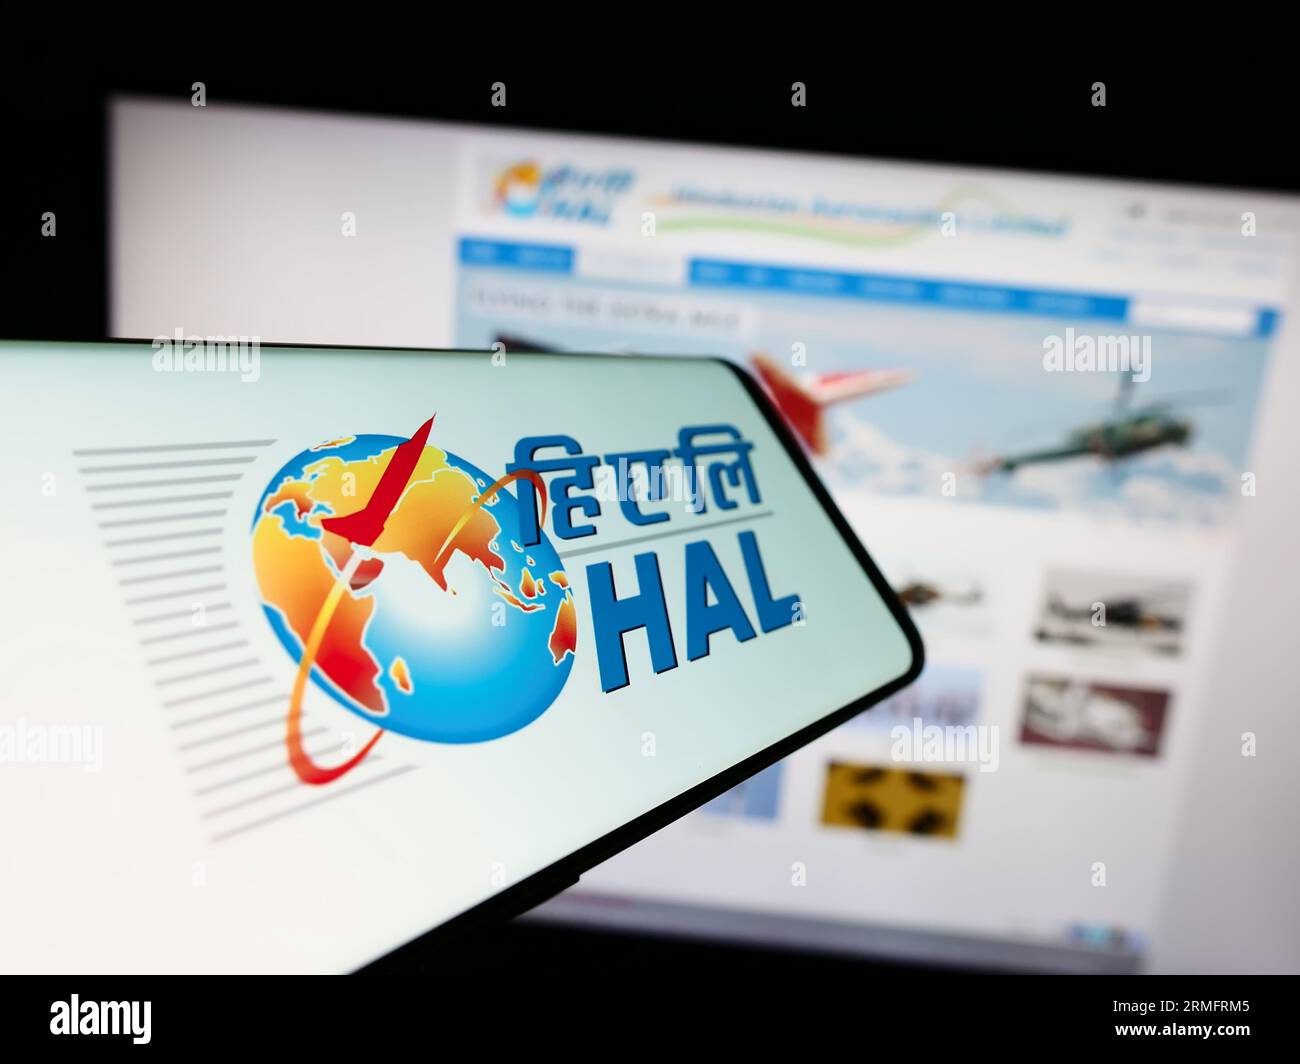 Cellphone with logo of company Hindustan Aeronautics Limited (HAL) on screen in front of business website. Focus on center of phone display. Stock Photo